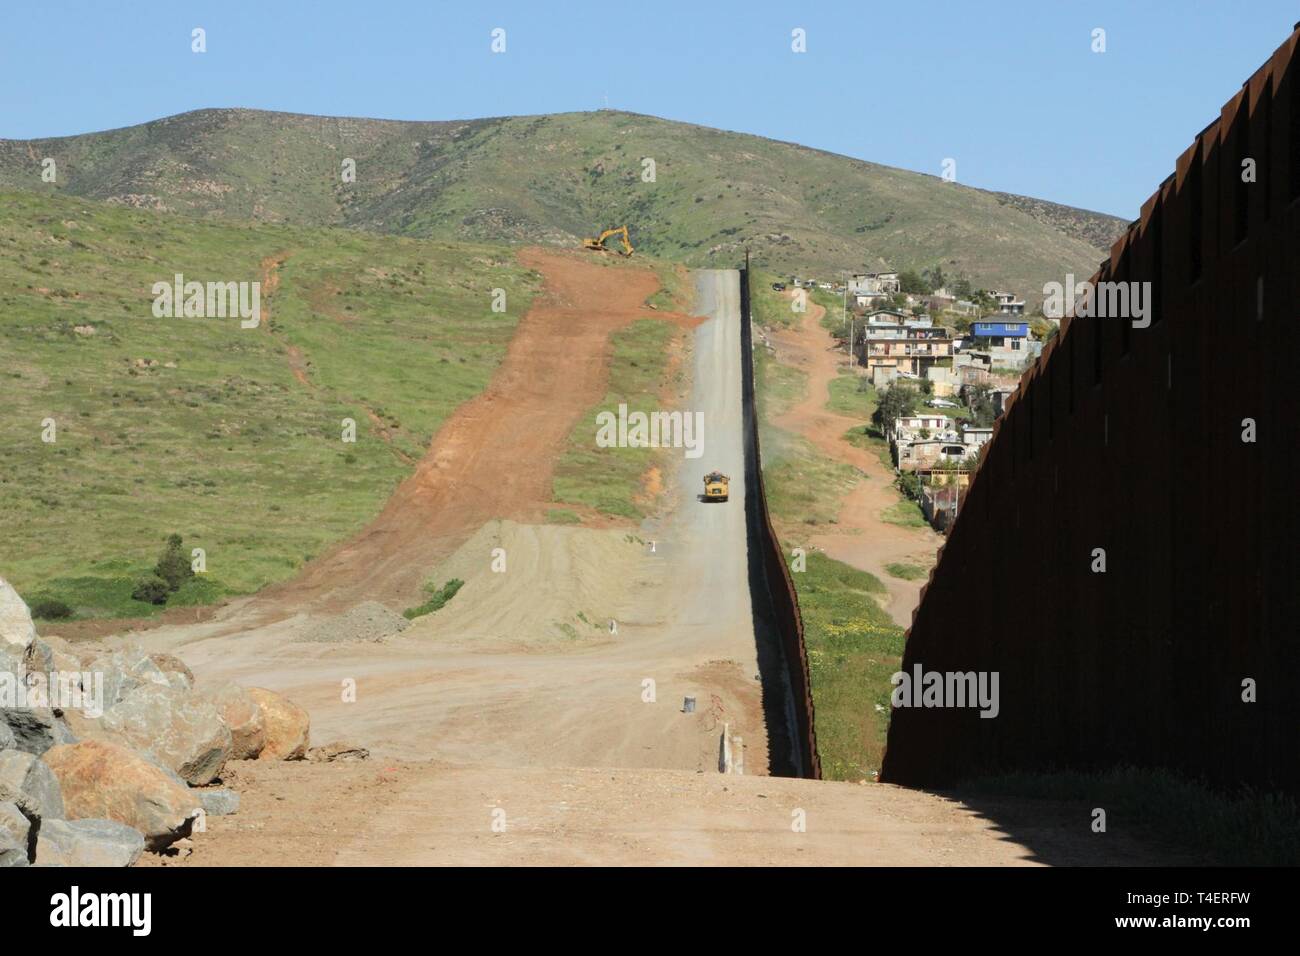 A view of the existing San Diego primary border wall (right) with "Tin Can Hill" in the background, and the cleared terrain for the San Diego secondary border wall (left) on March 28, 2019.  The Corps is supporting the Department of Homeland Security's request to build additional border wall near San Diego. Stock Photo